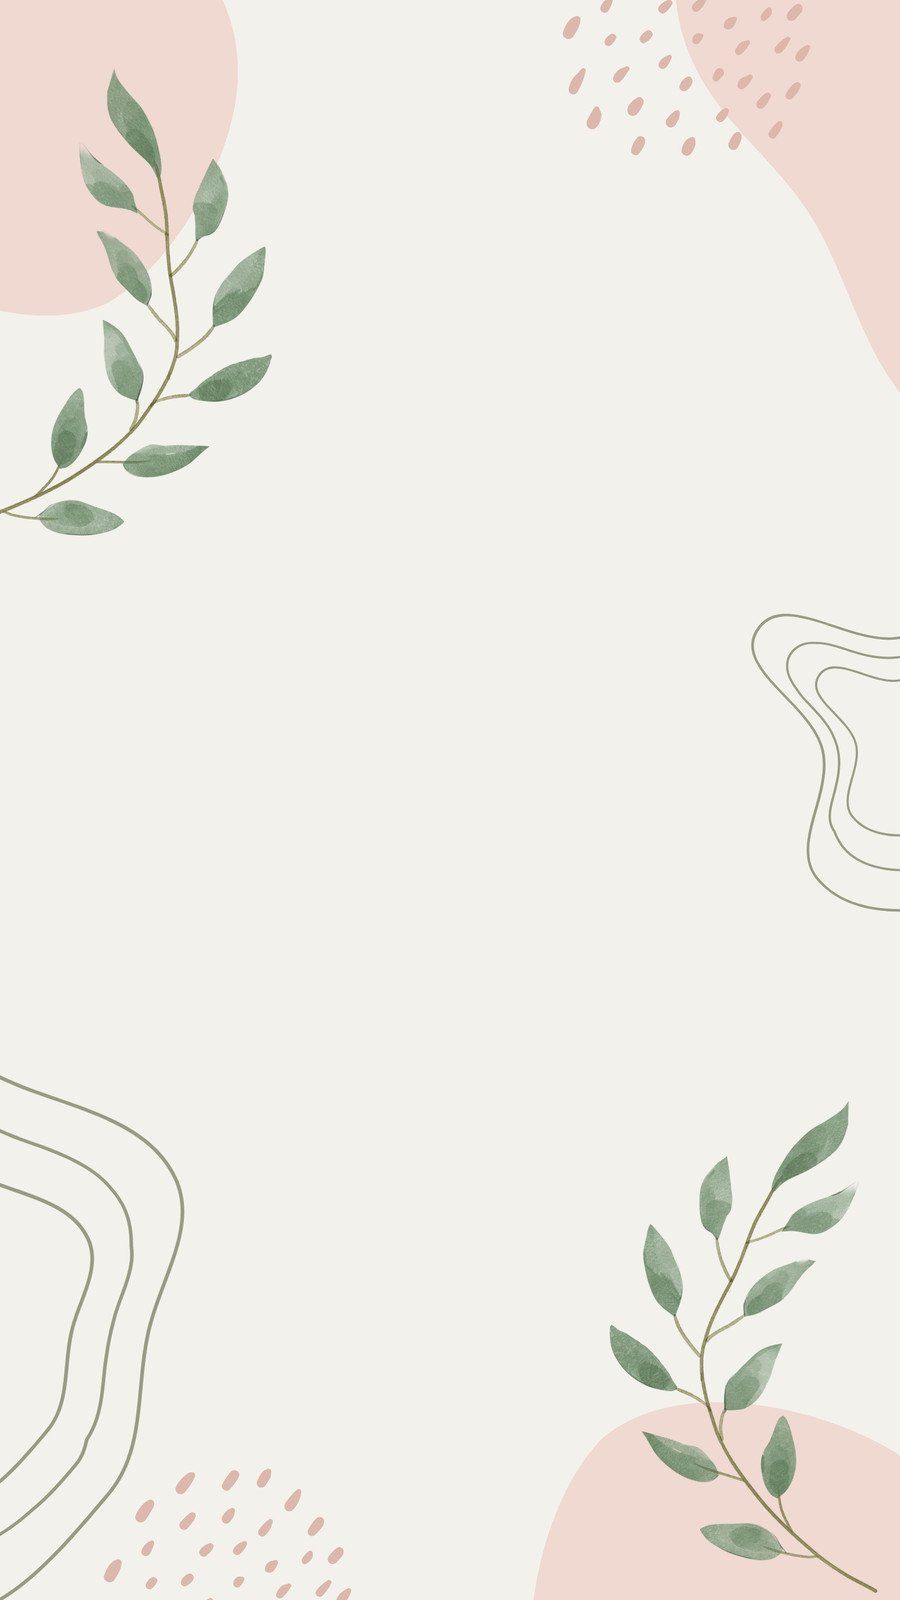 A pink and green background with leaves - Beige, leaves, cream, boho, phone, watercolor